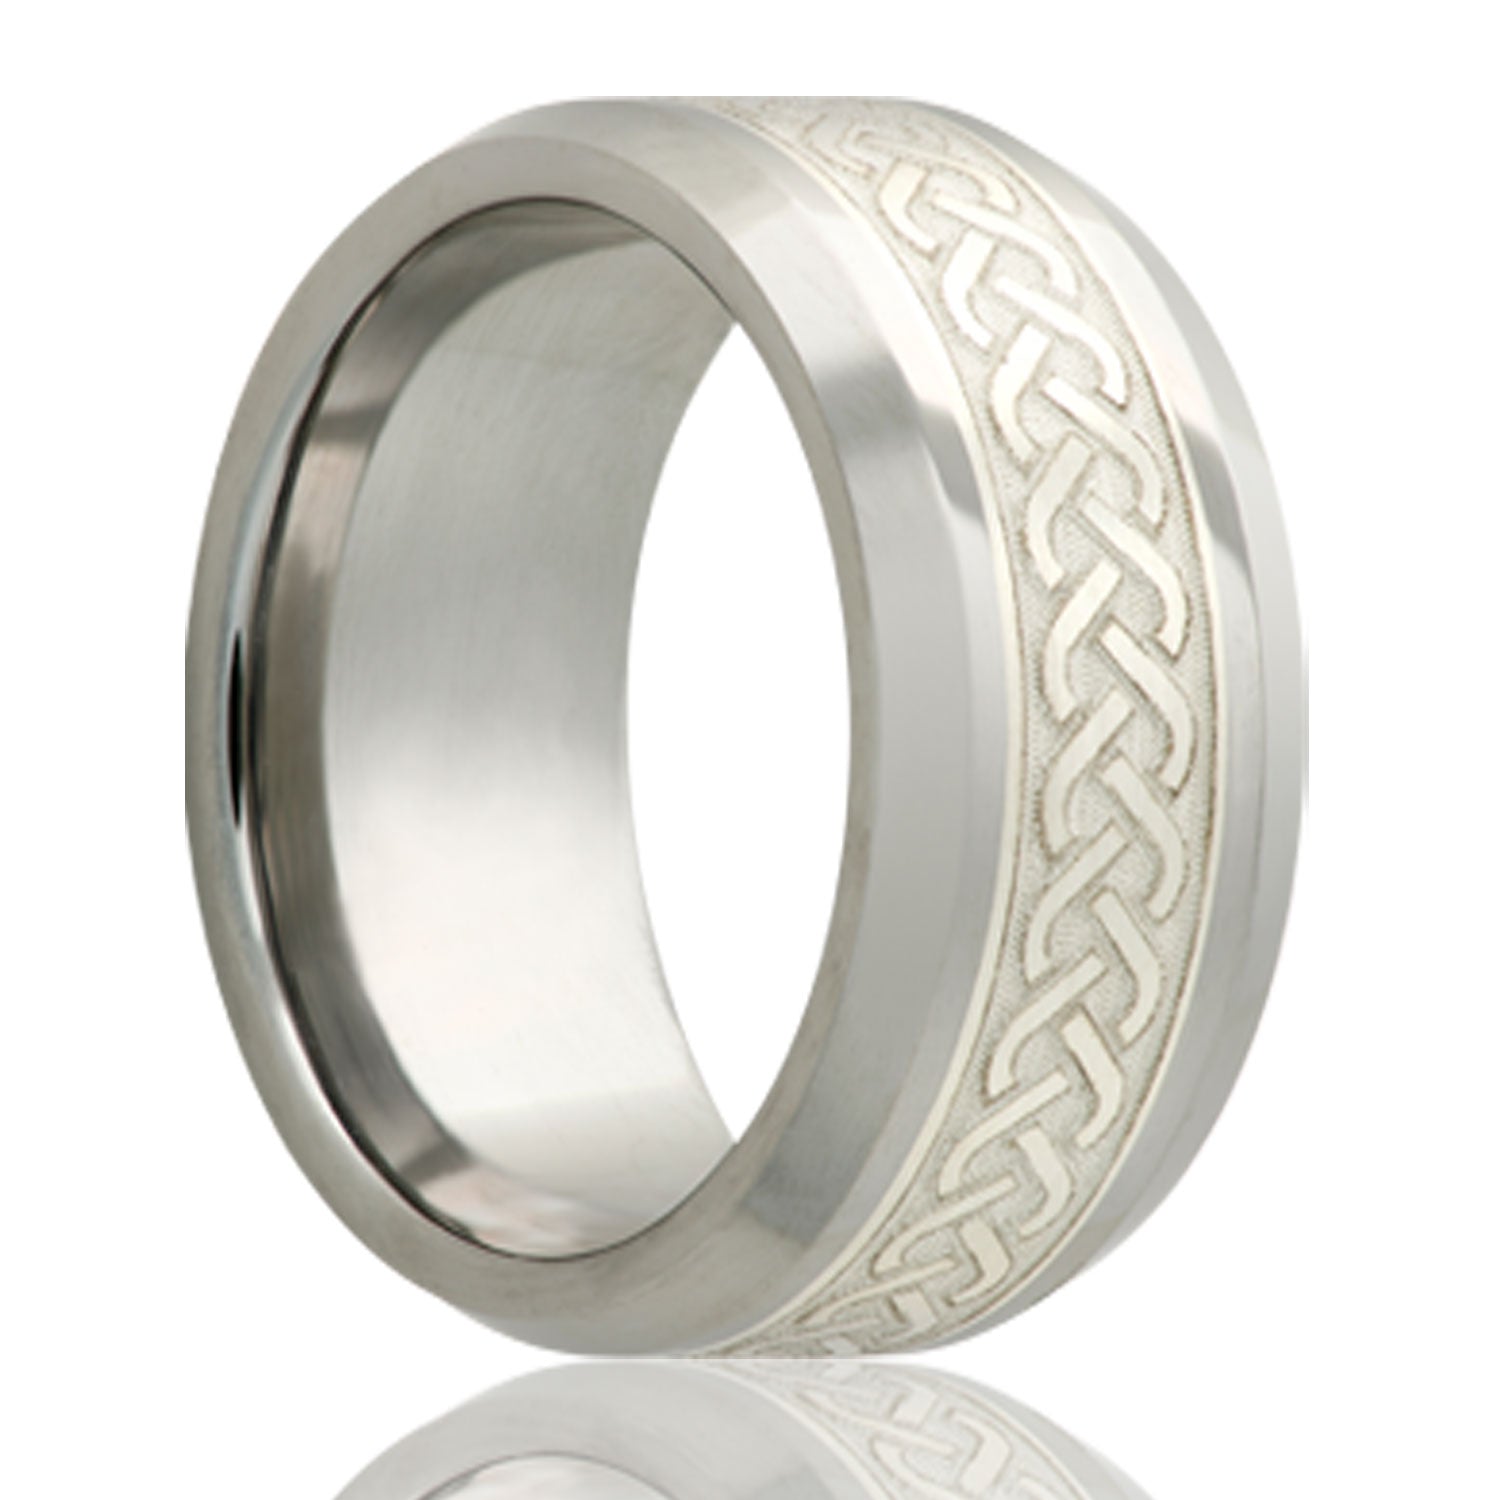 A celtic knot silver inlay tungsten men's wedding band with beveled edges displayed on a neutral white background.